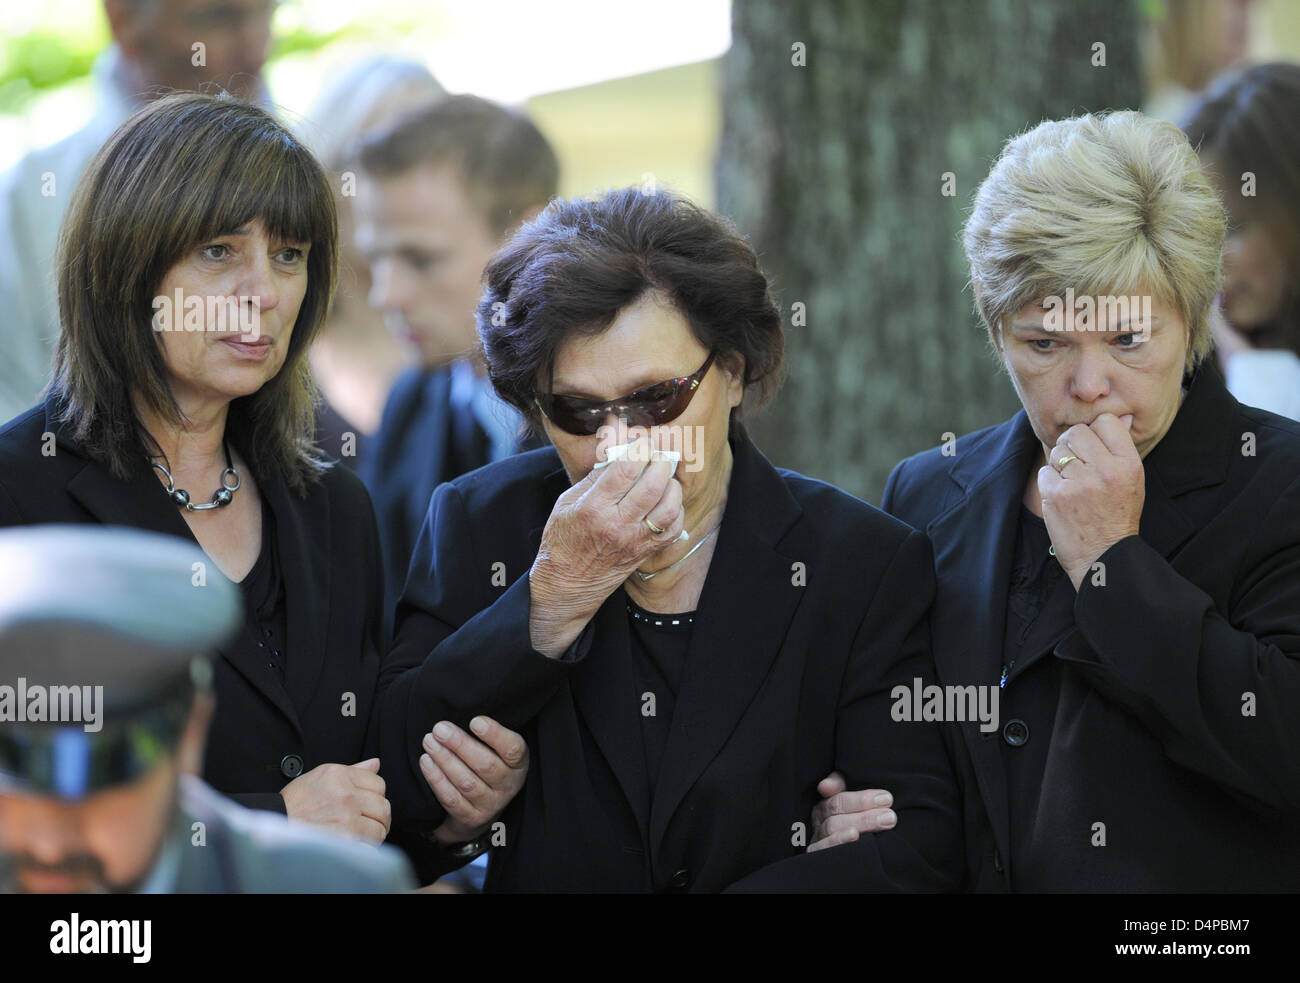 Sisters Doris (L), Beate (R) and mother Margot (C) mourn during the funeral of German actress Barbara Rudnik in Munich, Germany, 29 May 2009. Rudnik passed away aged 50 on 23 May 2009 after a long struggle against cancer. Photo: Tobias Hase Stock Photo